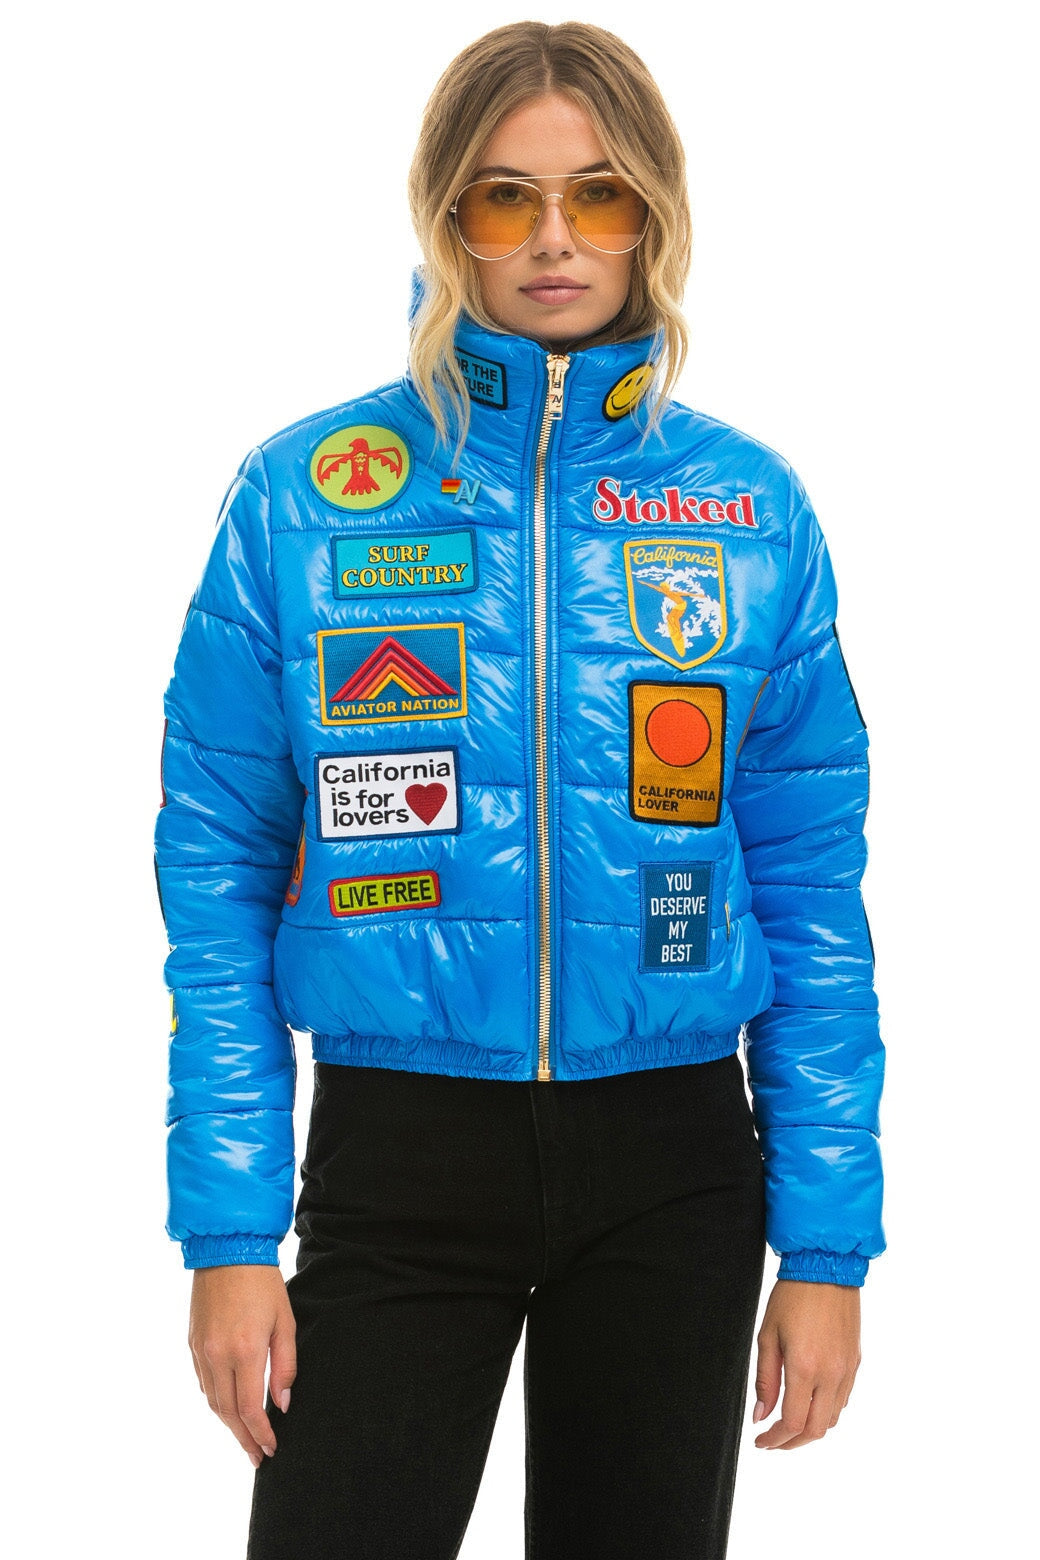 VINTAGE PATCH APRES PUFFER JACKET - BLUE CINA GLOSSY Women's Outerwear Aviator Nation 